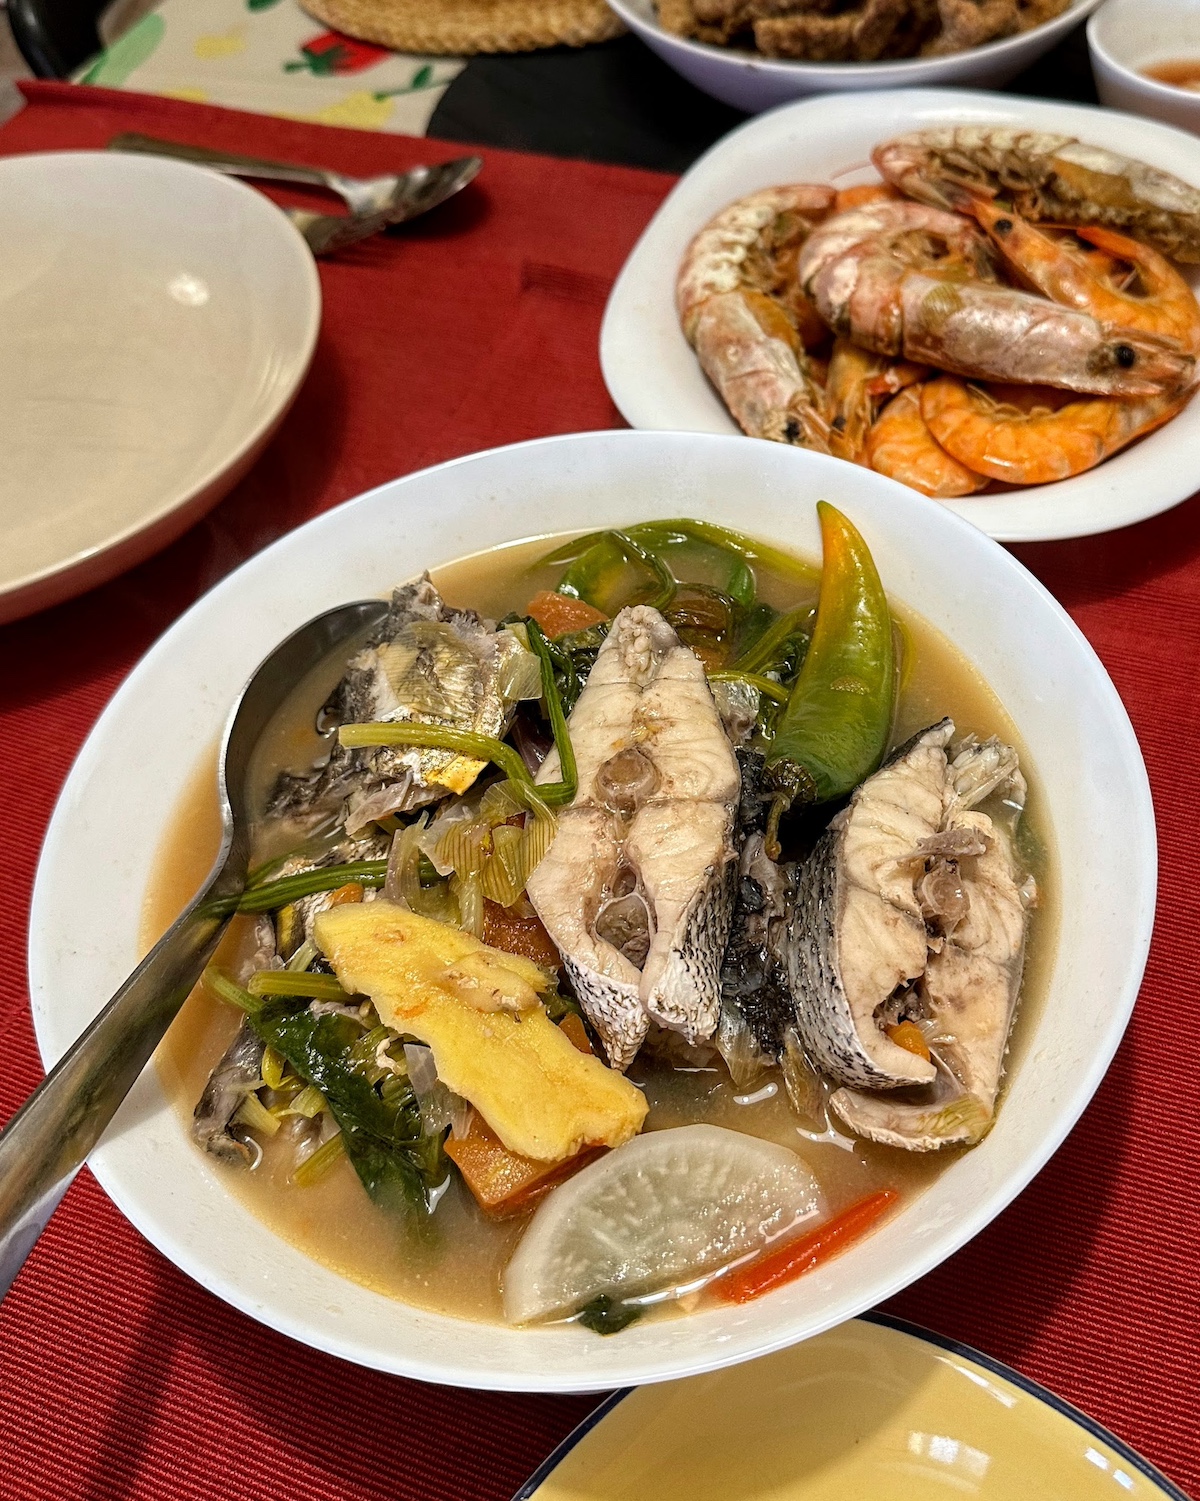 Sinigang na Isda served in a serving dish